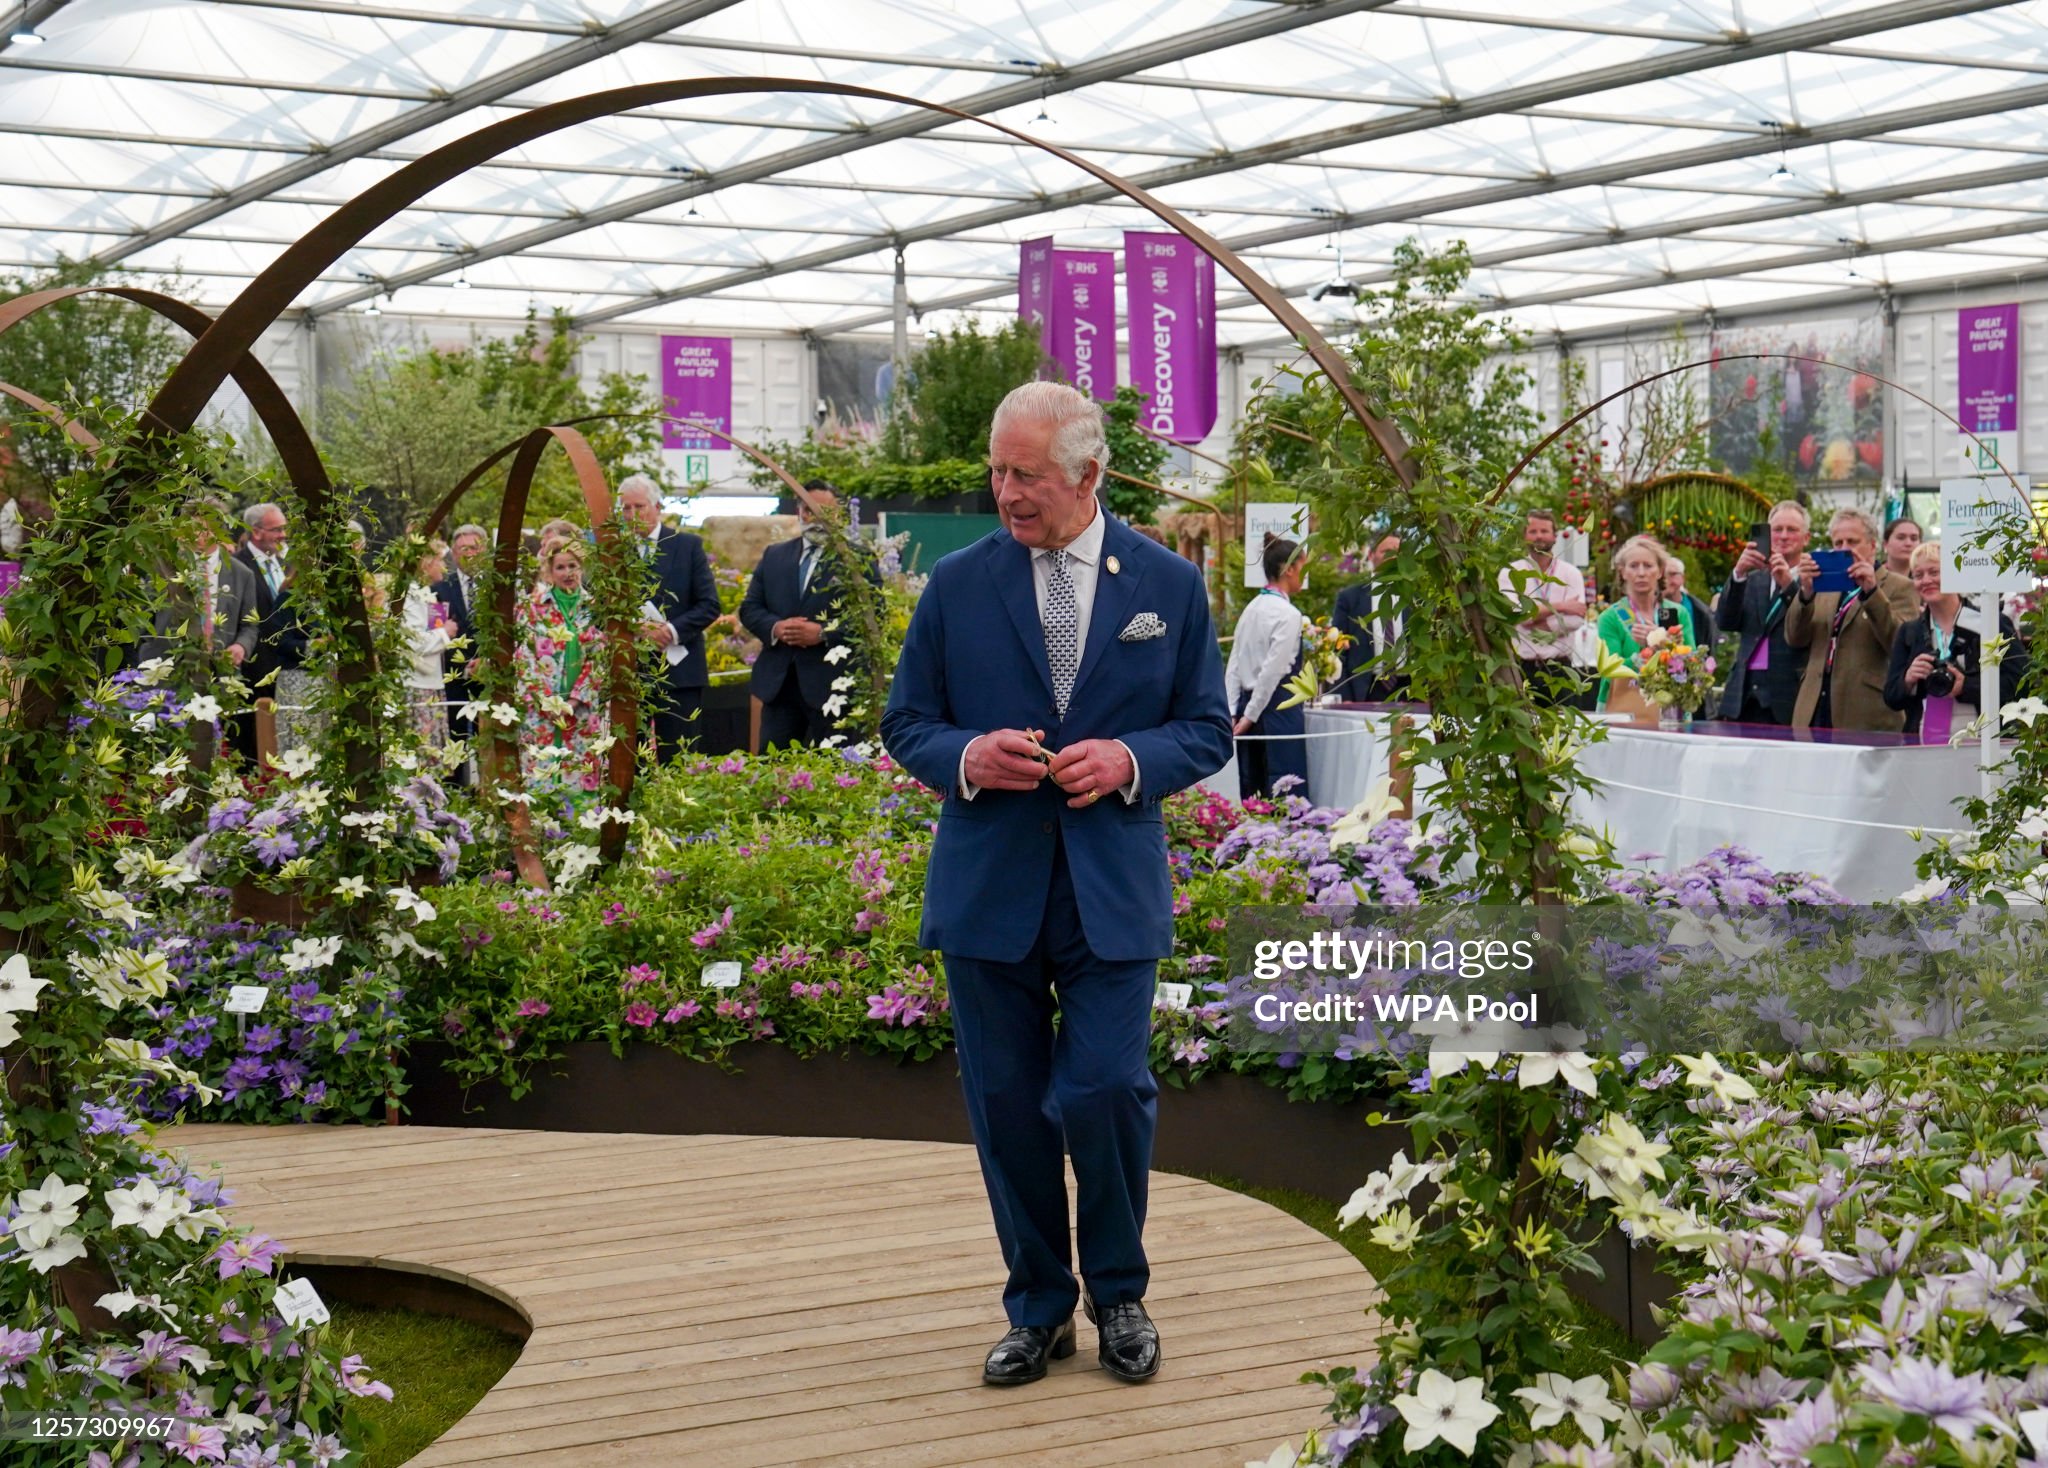 britains-king-charles-iii-visits-the-raymond-evison-clematis-stand-at-the-chelsea-flower-show.jpg